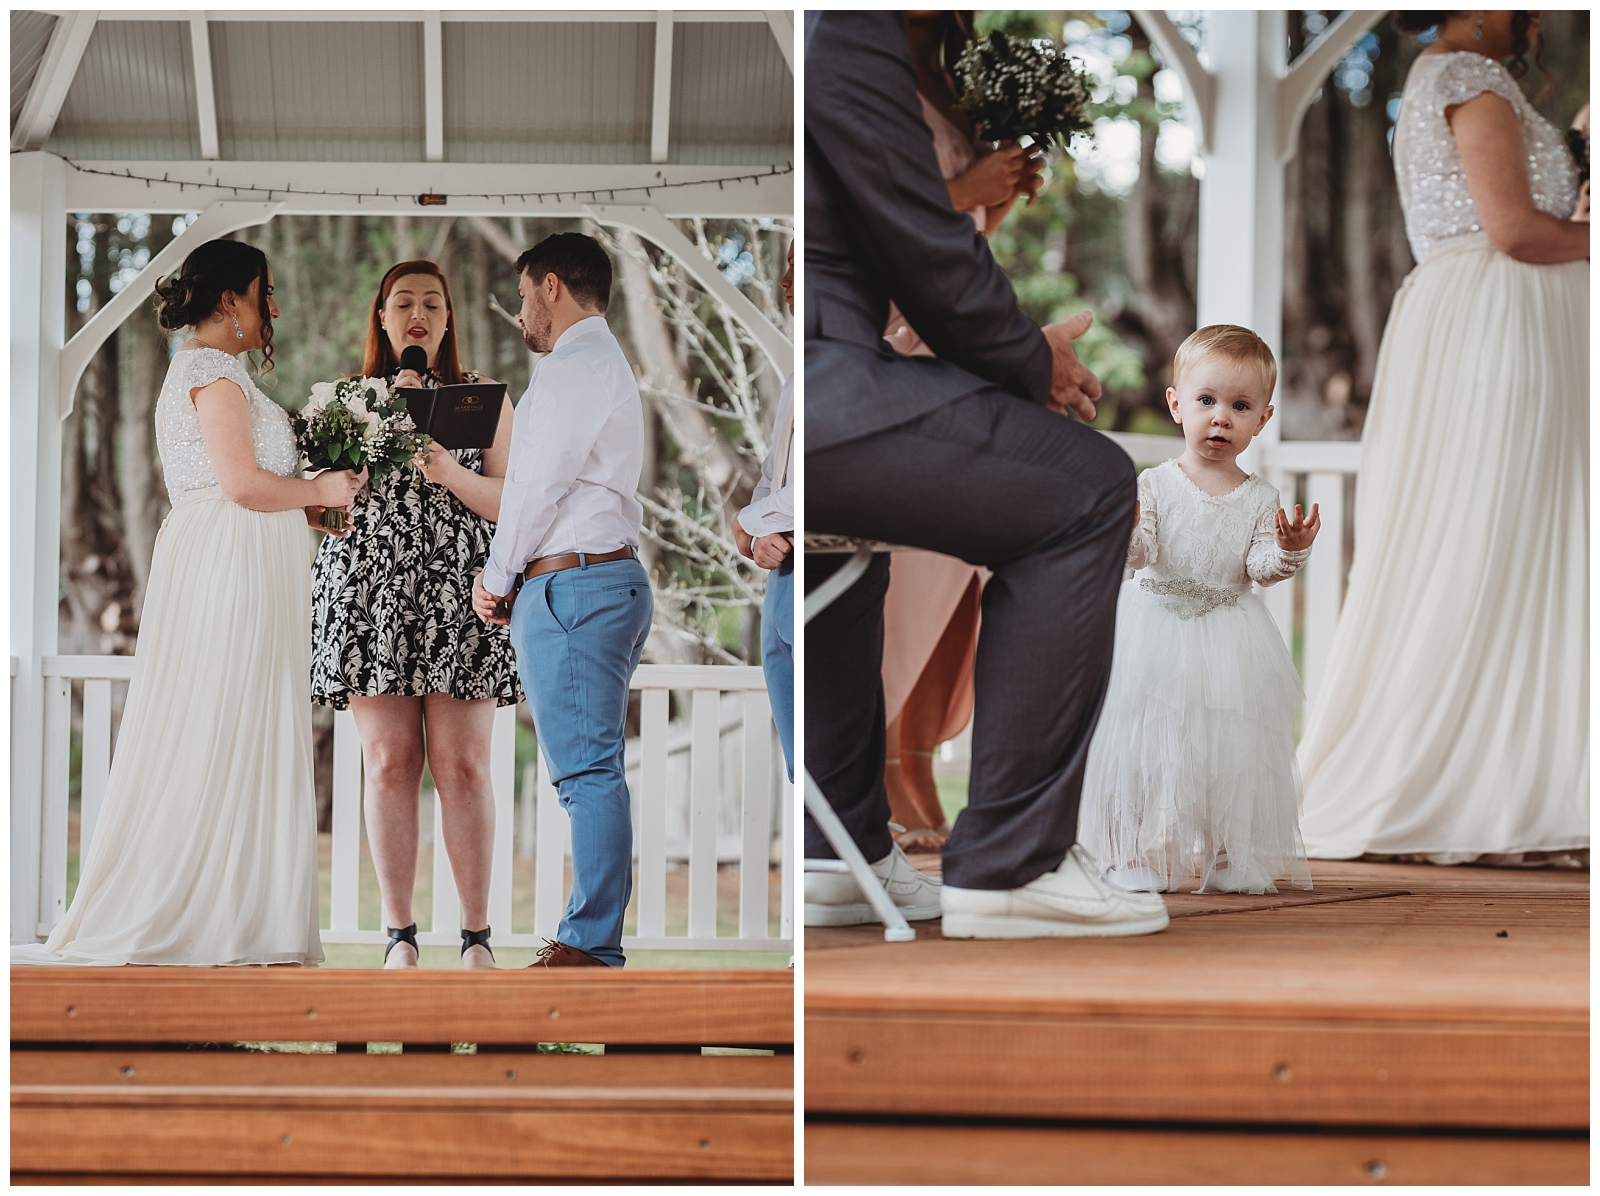 Bride and Groom facing each other during ceremony as celebrant speaks. Flower girl peaks around grandfathers leg to look at camera